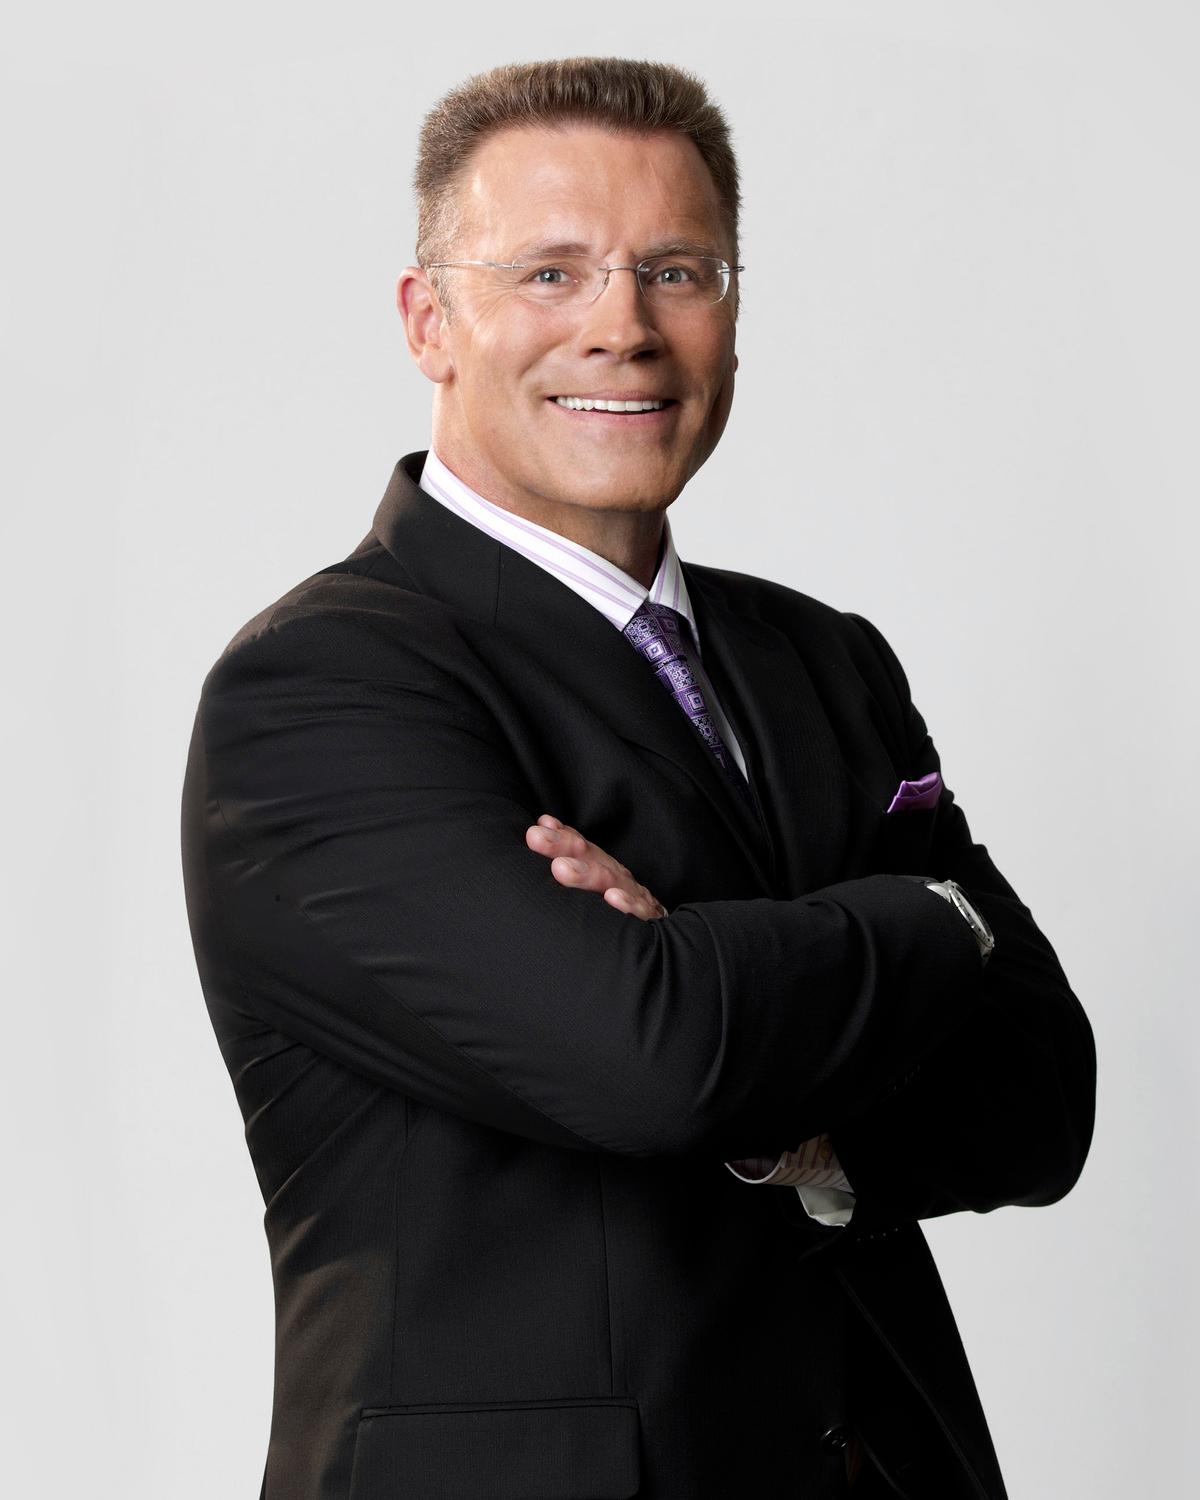 Howie Long image